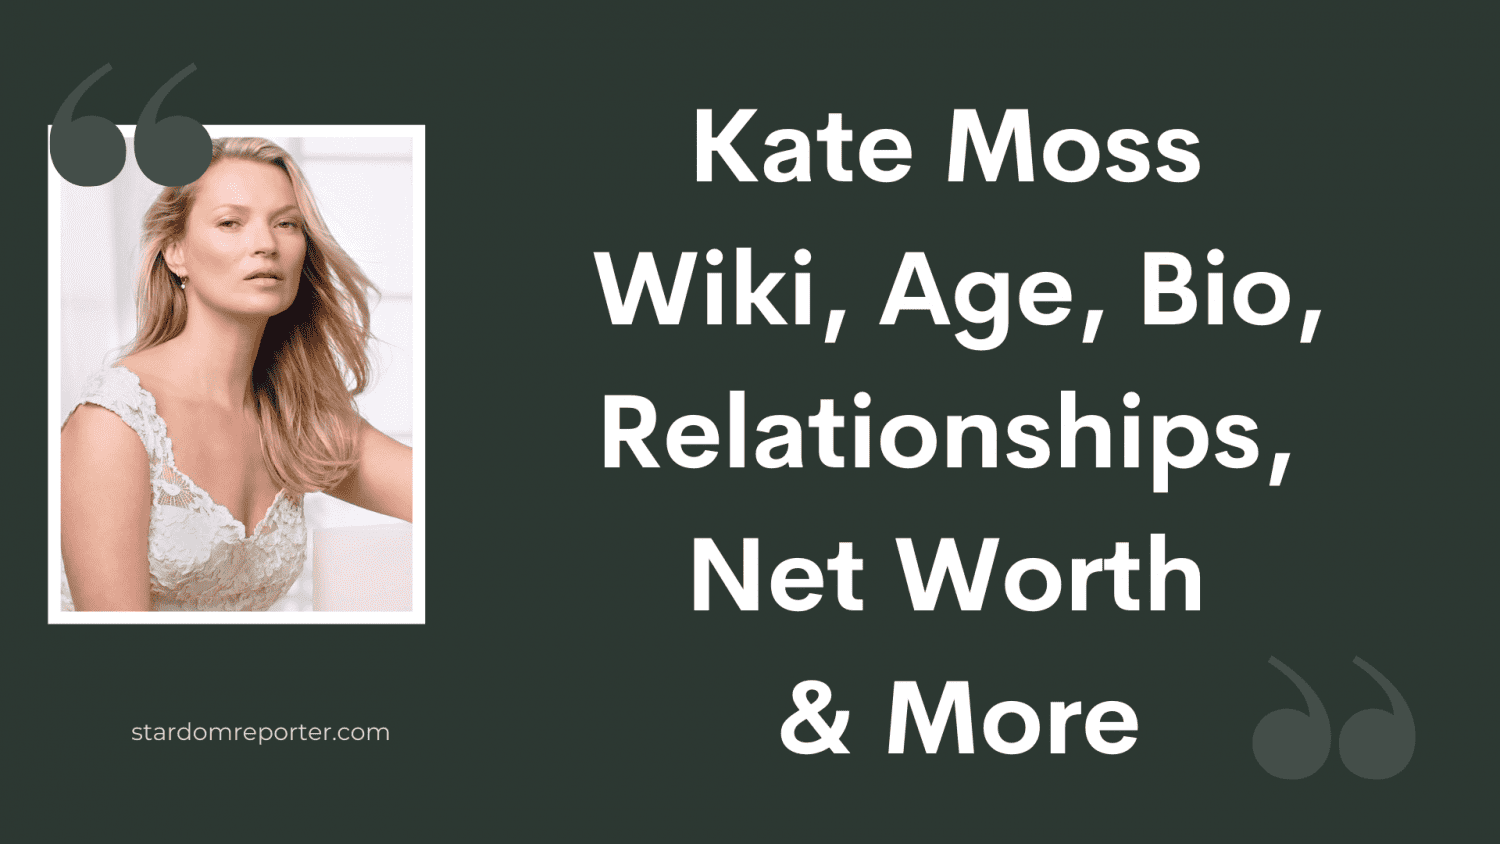 Kate Moss Wiki, Age, Bio, Relationships, Net Worth & More - 1